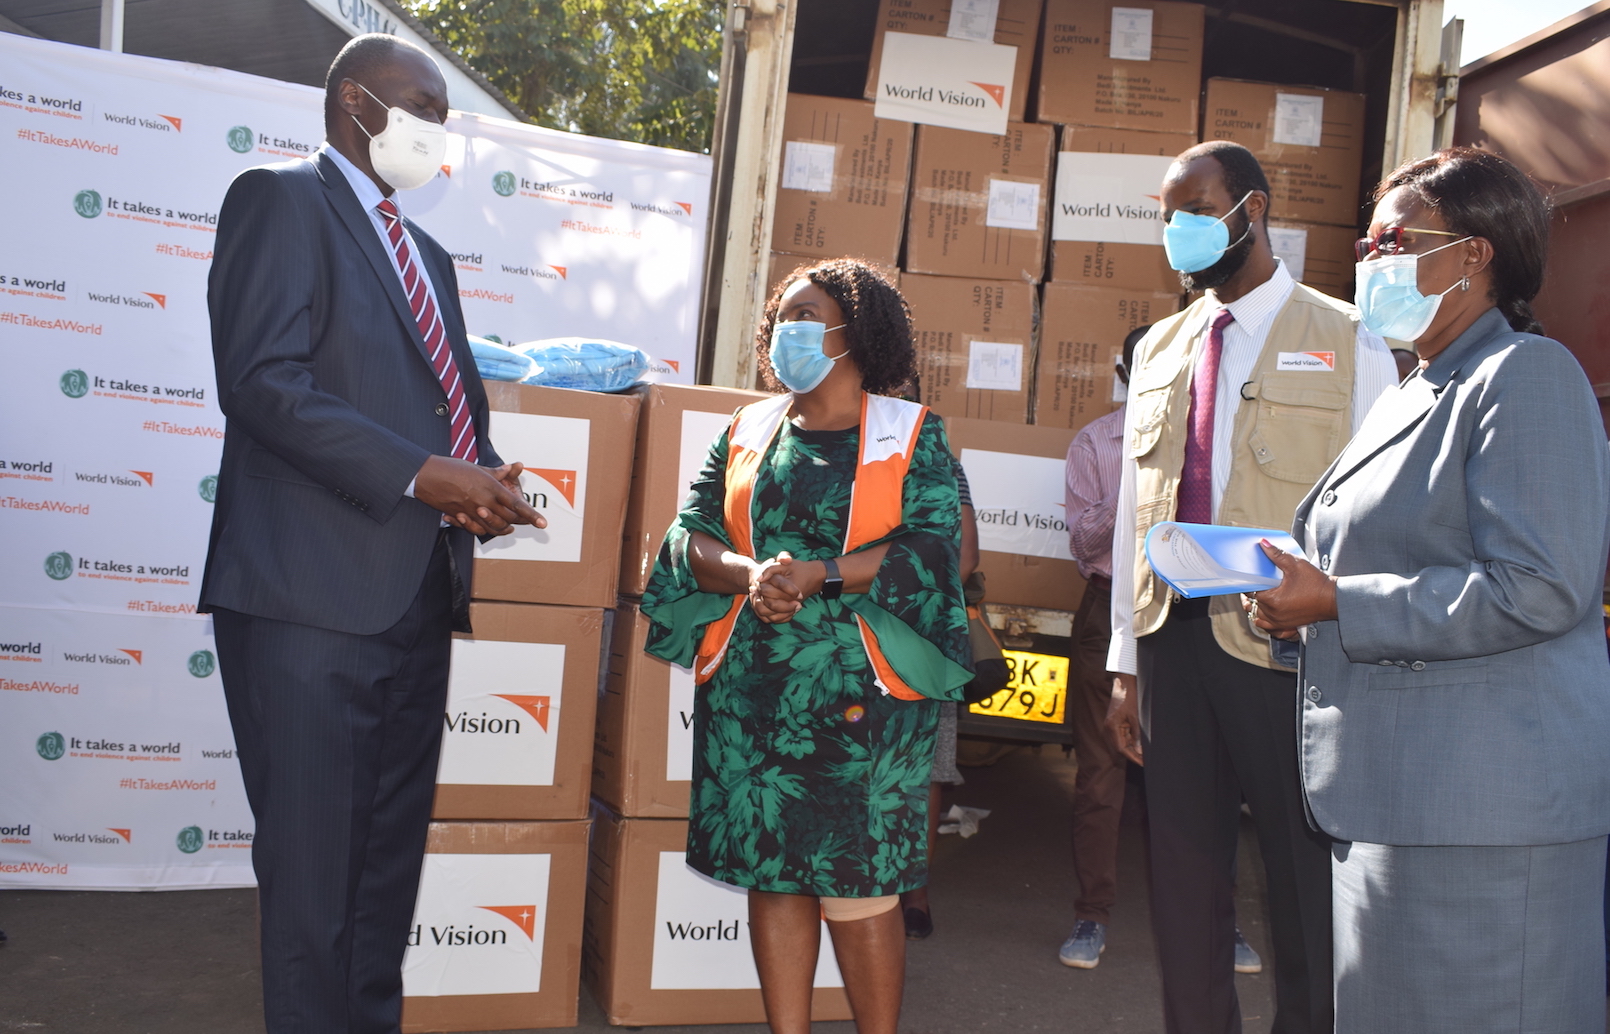 Dr. Patrick Amoth (the Acting Director General for the Ministry of Health), Lilian Dodzo (National Director of World Vision Kenya), Dr. Stephen Omollo (Vice President for World Vision in East Africa) and Dr Mary Nandili (the Director of Nursing Services at the Ministry of Health).